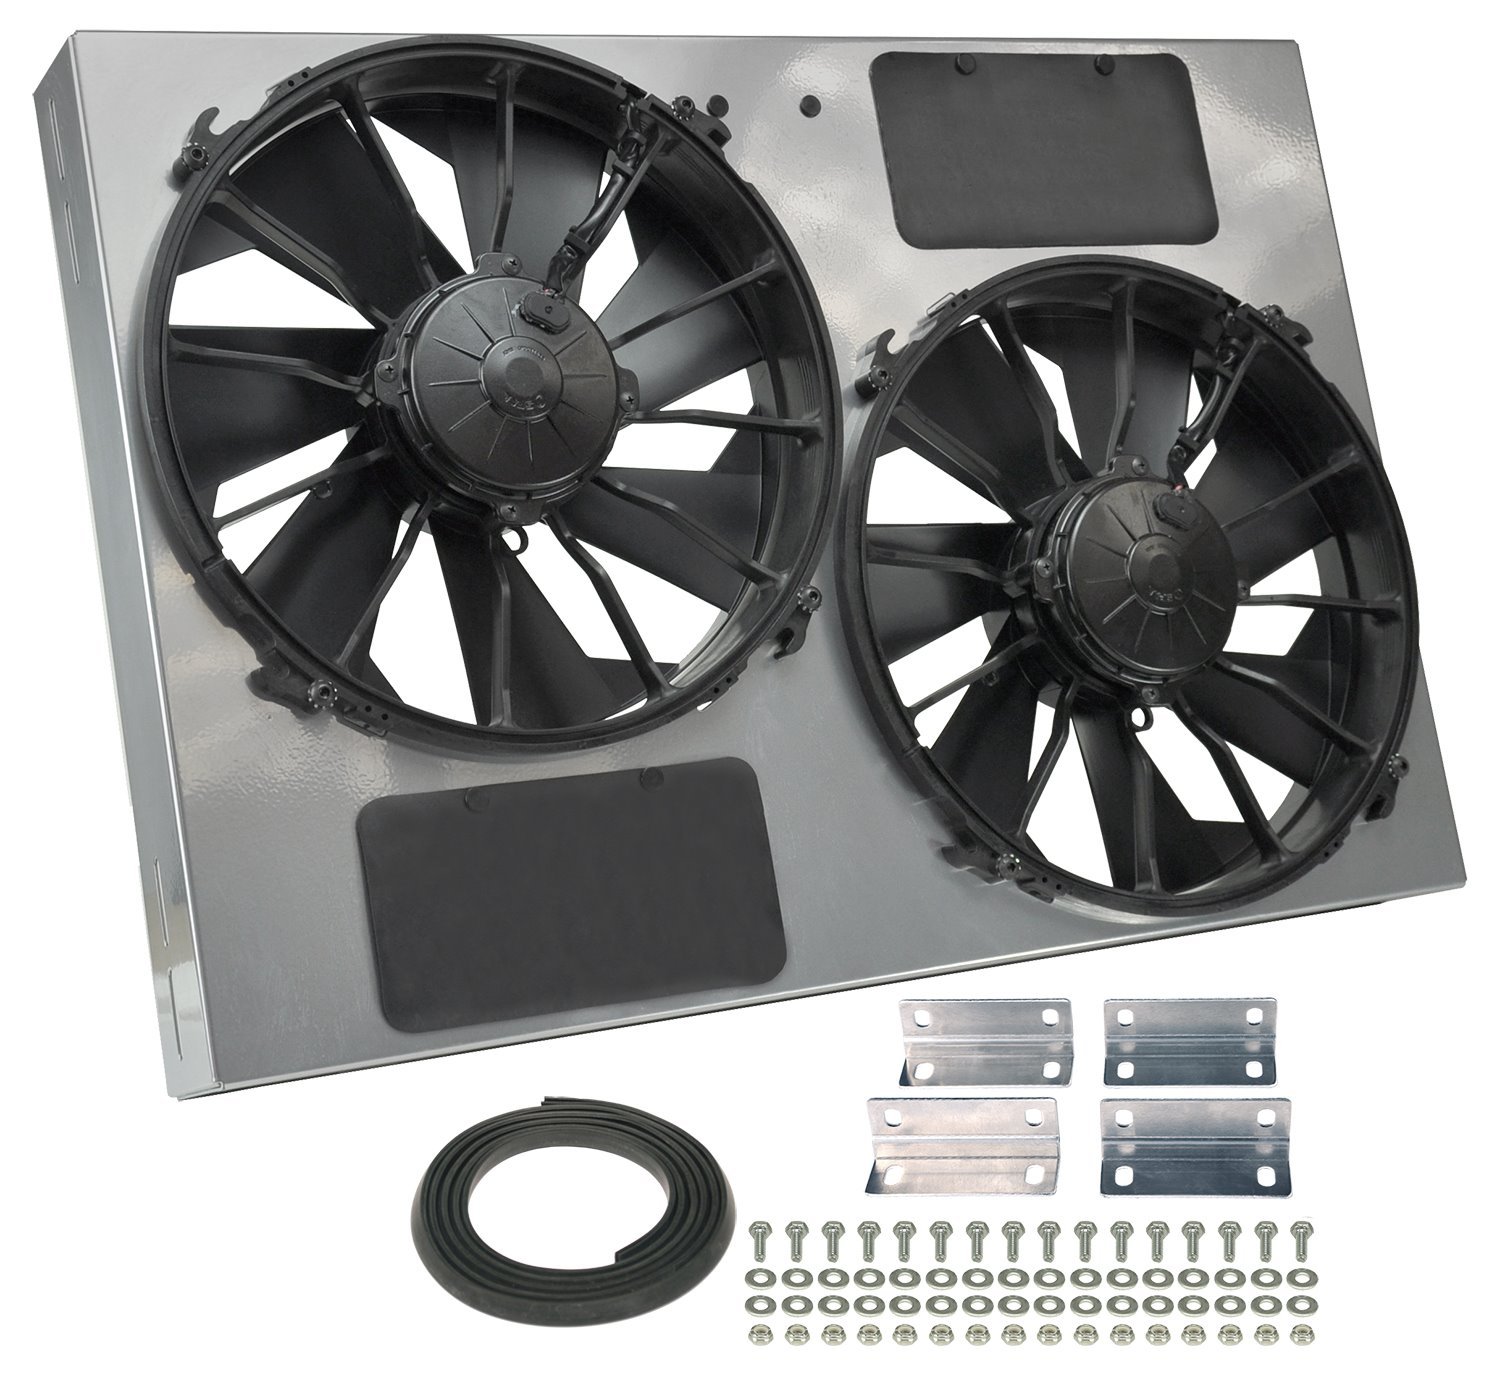 High-Output Dual Fan Assembly CFM: 4000